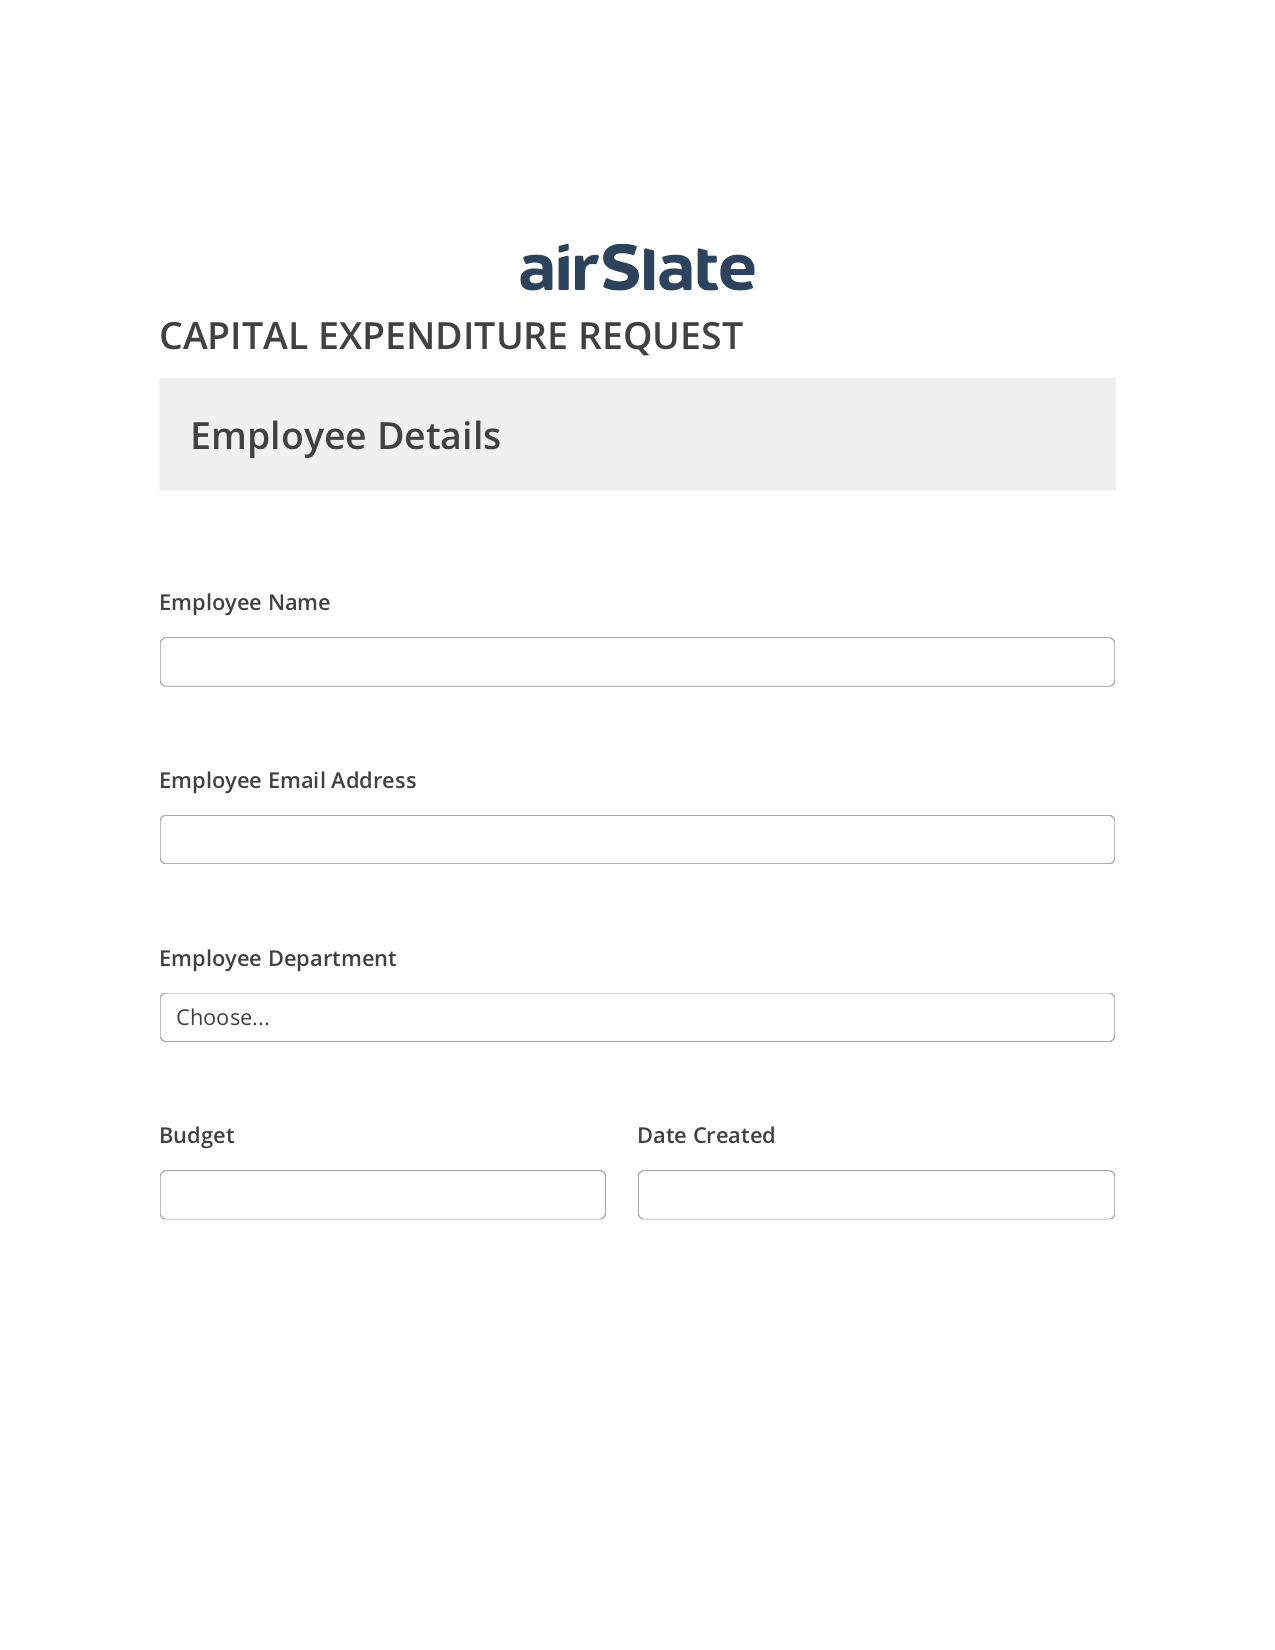 Capital Expenditure Request Approval Workflow System Bot - Slack Two-Way Binding Bot, Google Calendar Bot, Export to NetSuite Bot